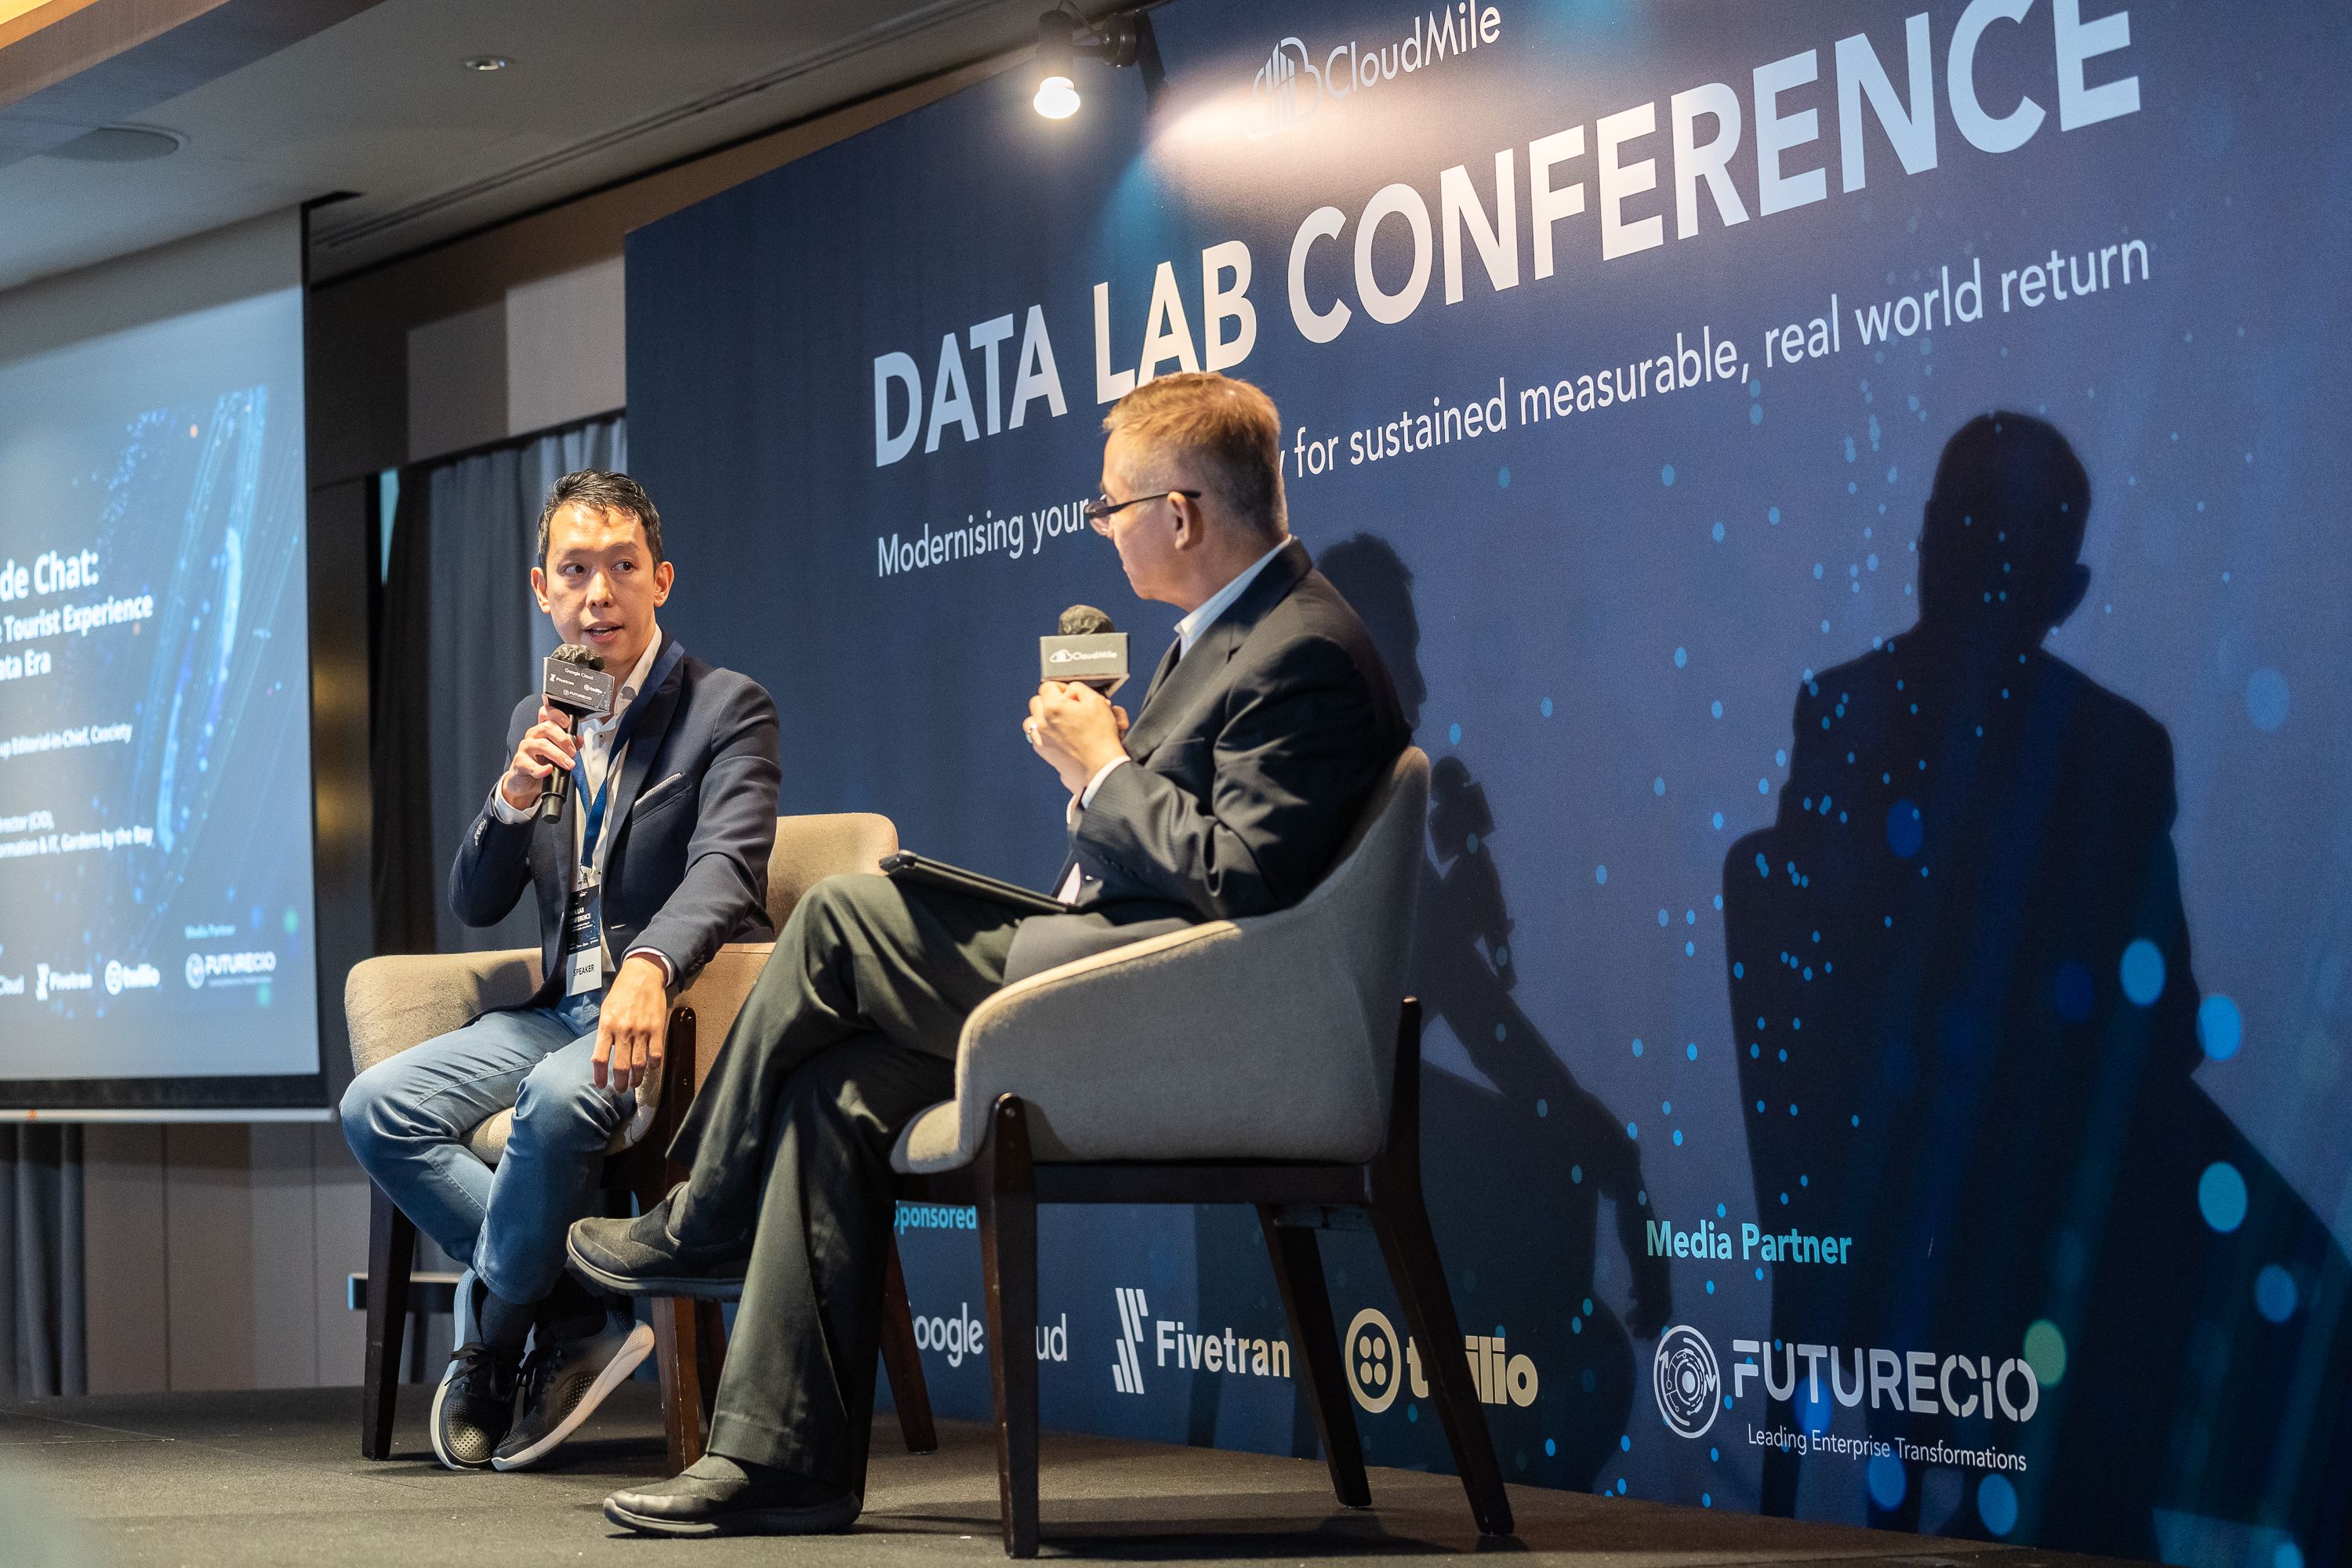 CloudMile Hosted its first Data Lab Conference in Singapore